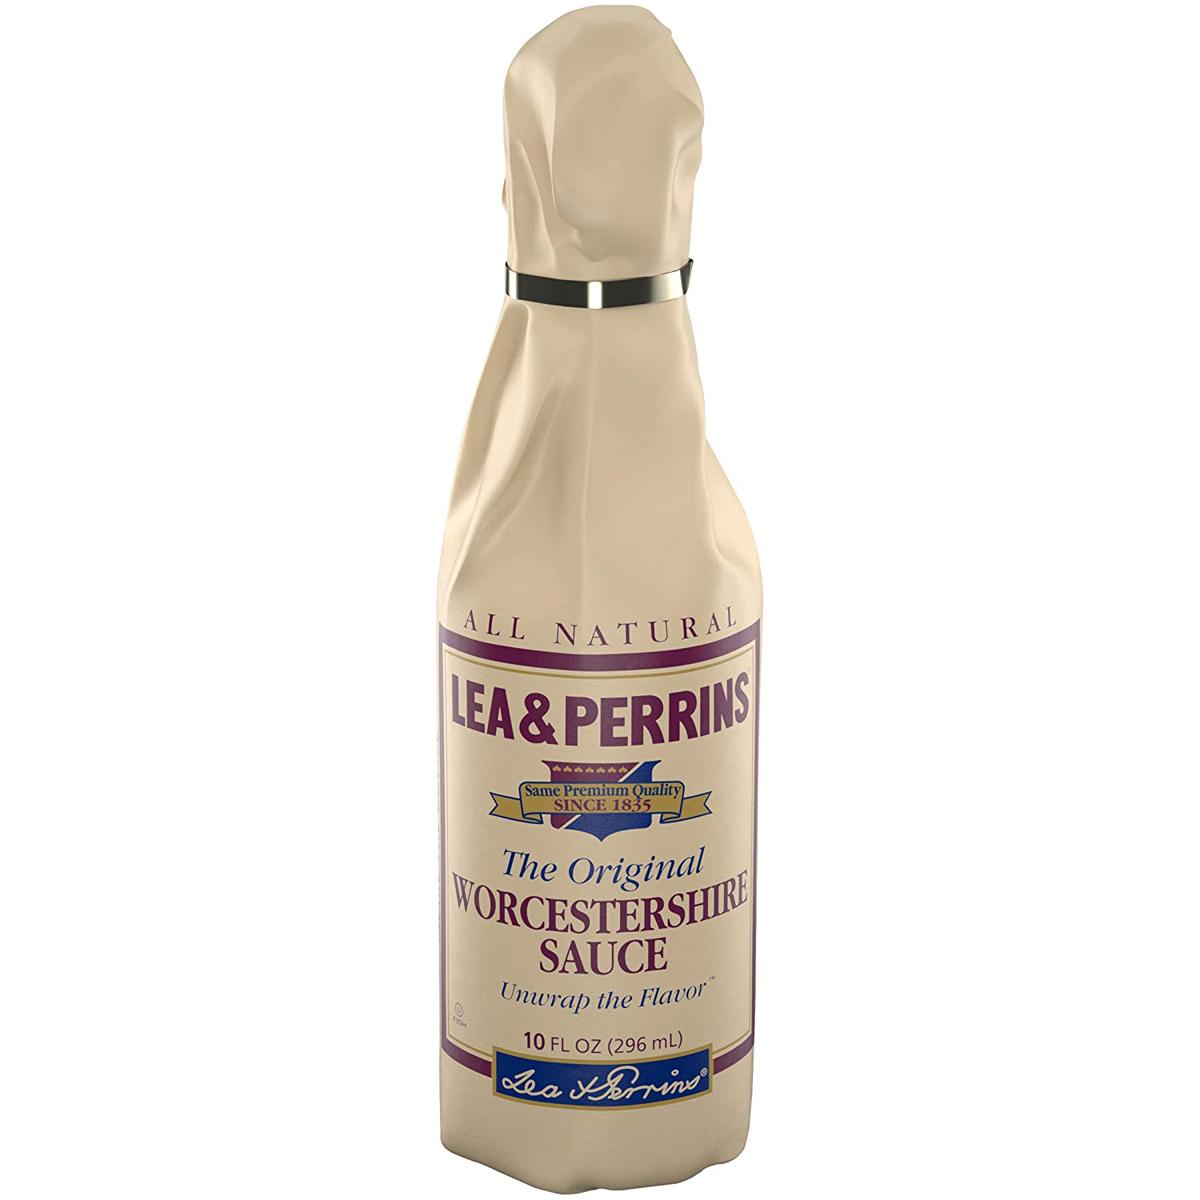 Lea and Perrins Worcestershire Sauce for $2.48 Shipped